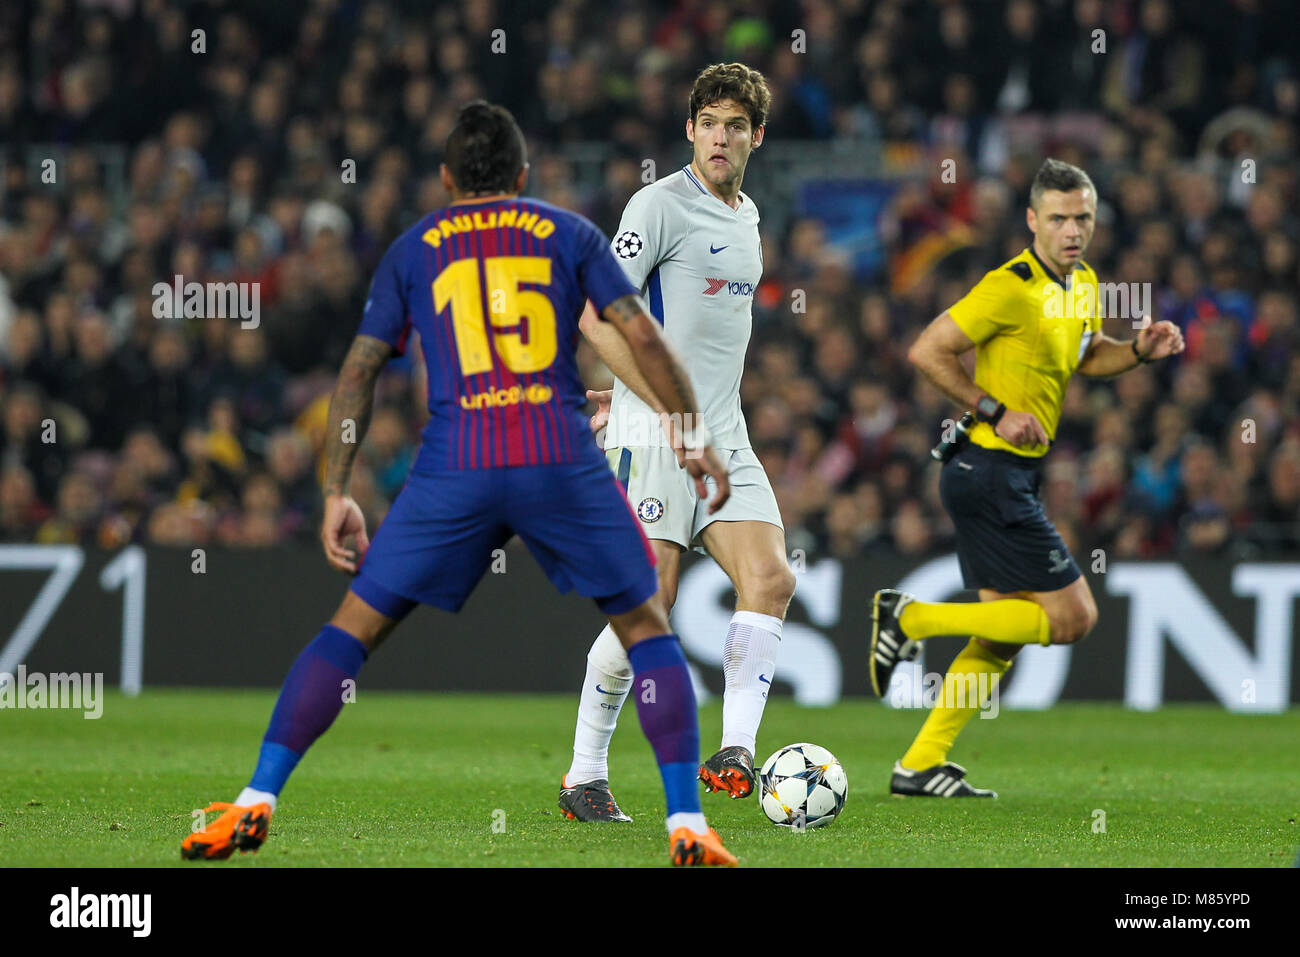 Barcelona, Spain. 14th March 2018; Marcos Alonso, Chelsea FC player in action with Paulinho, #15 player of FC Barcelona during the 2017/2018 UEFA Champions League Round of 16 game between FC Barcelona and Chelsea at Camp Nou stadium on March 14, 2018 in Barcelona, Spain. Credit: UKKO Images/Alamy Live News Stock Photo